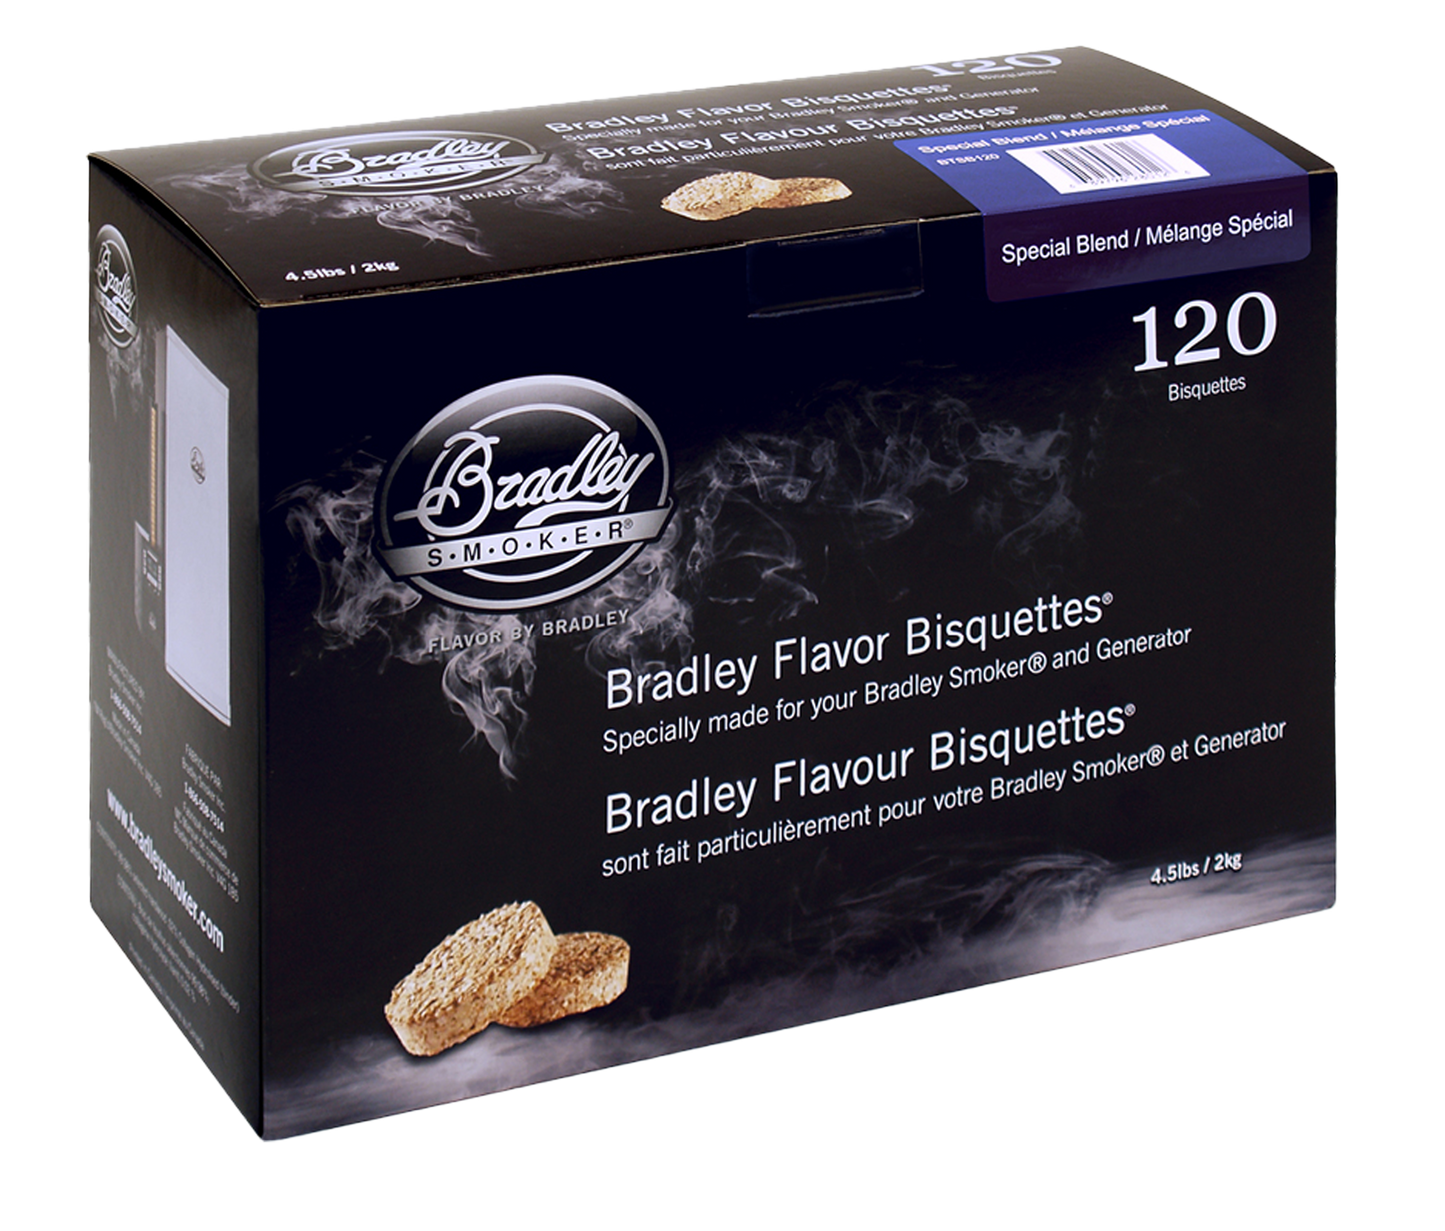 Special Blend Bisquettes for Bradley Smokers